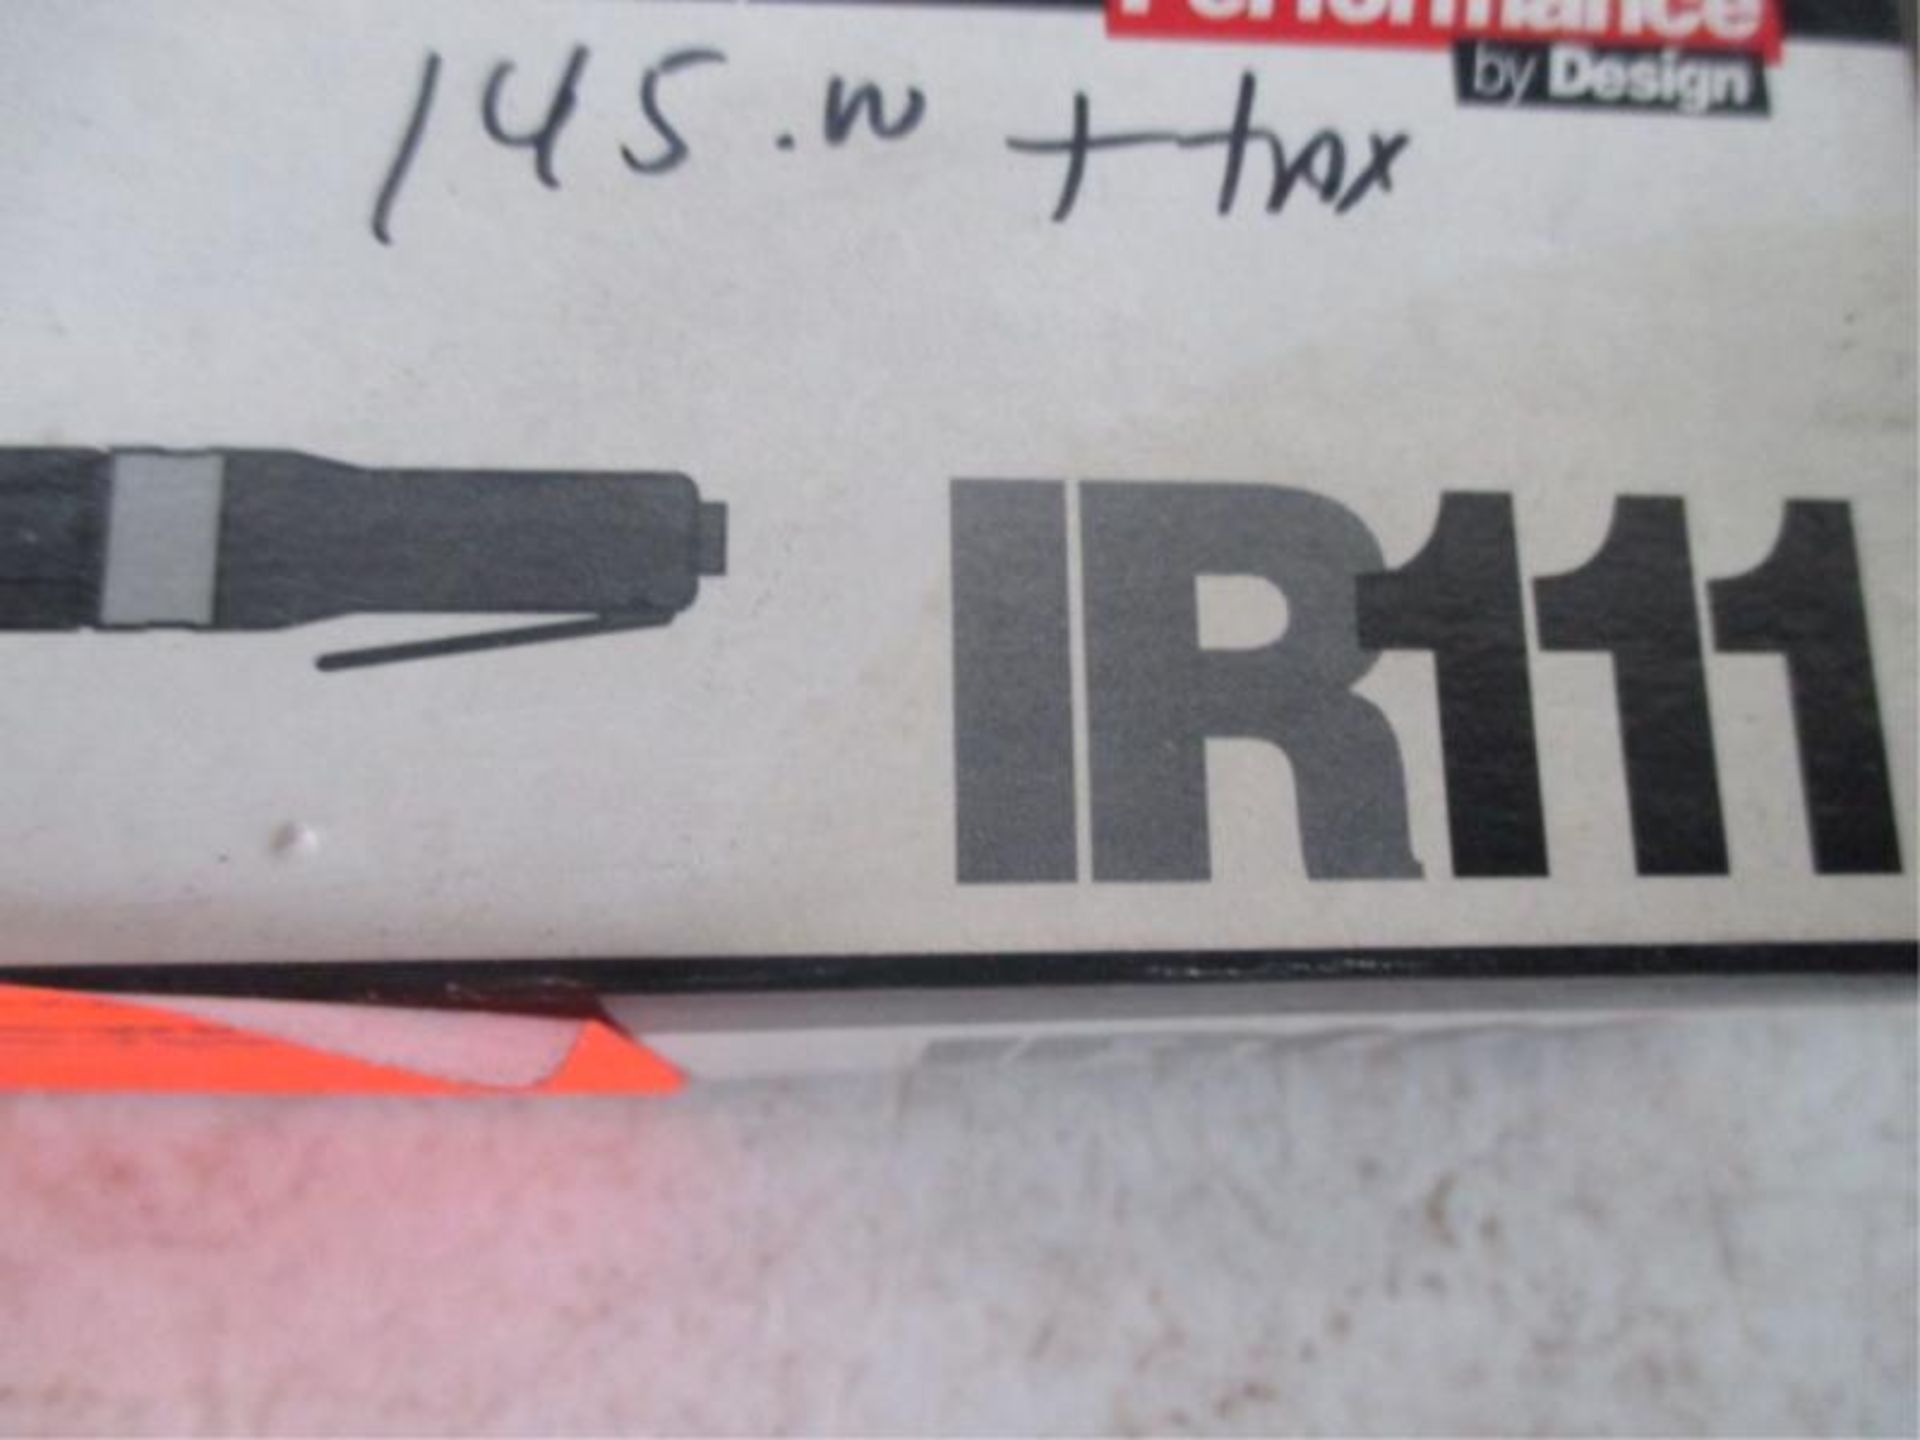 Air Ratchet Wrench, 3/8" Drive, Ingersol Rand, Super Duty, New in Box Super Duty, New in Box - Image 3 of 4